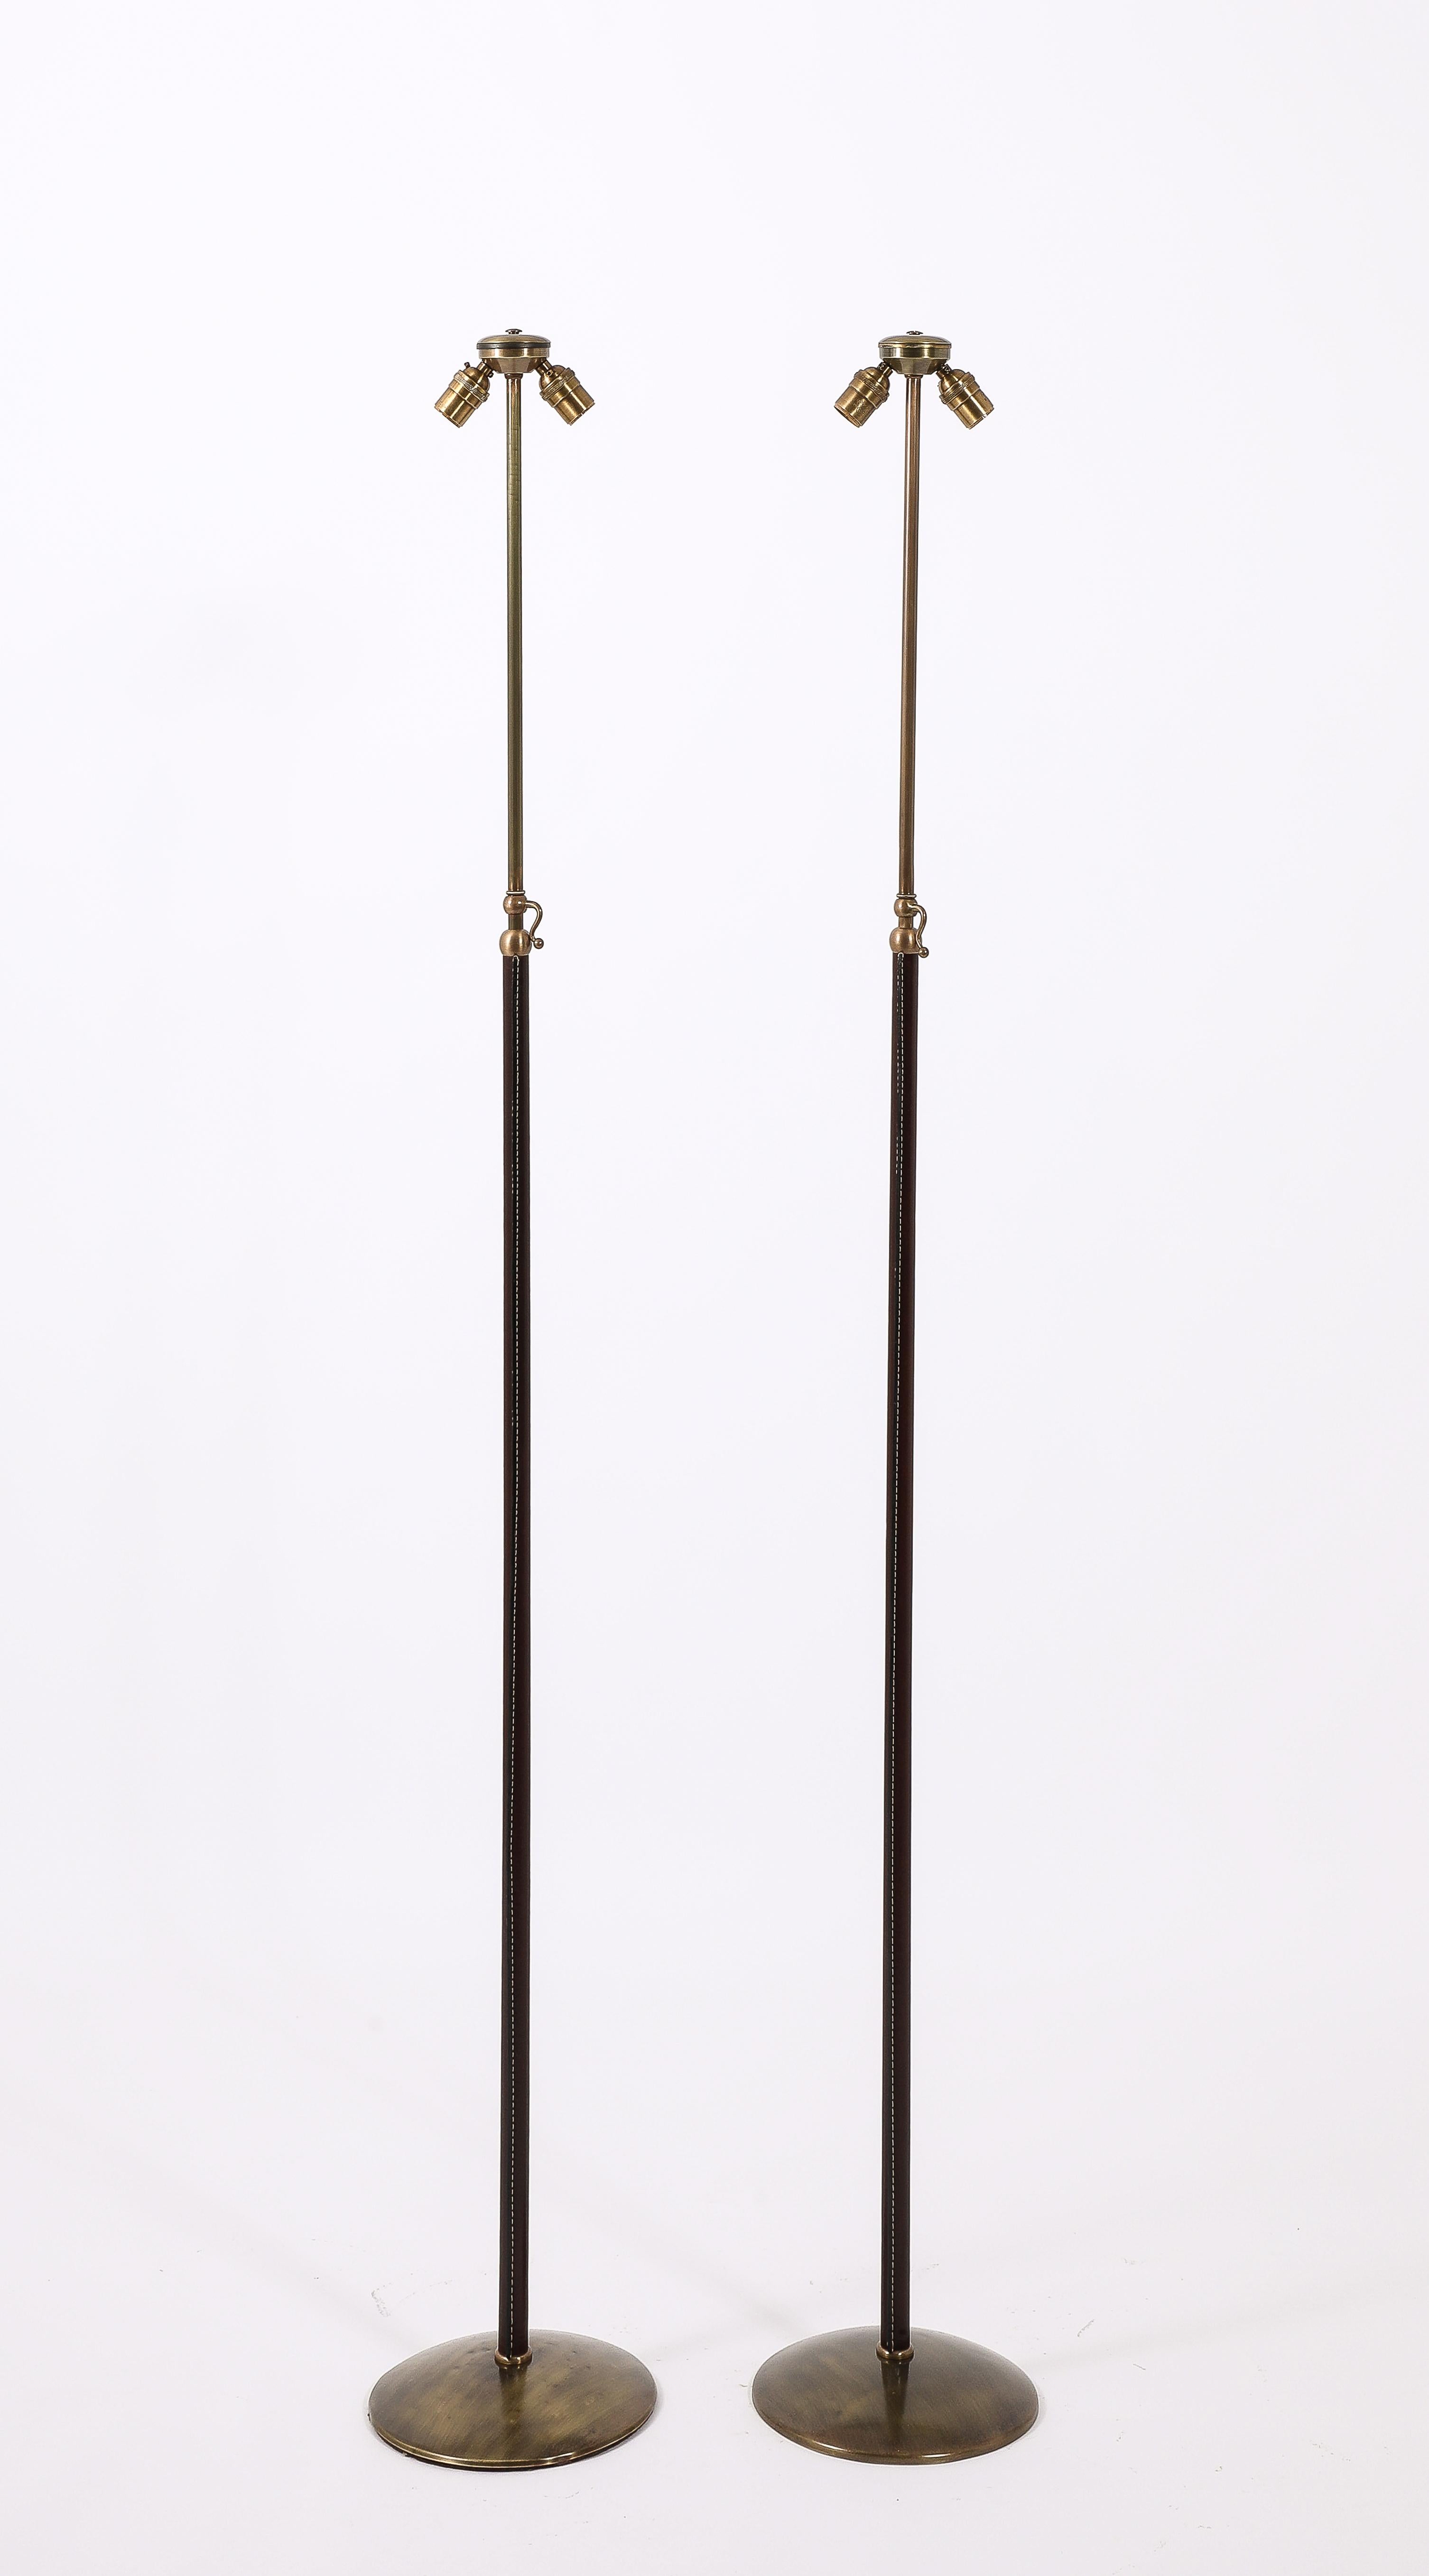 20th Century MetalArte Brass & Stitched Brown Leather Floor Lamps, Spain 1960's For Sale